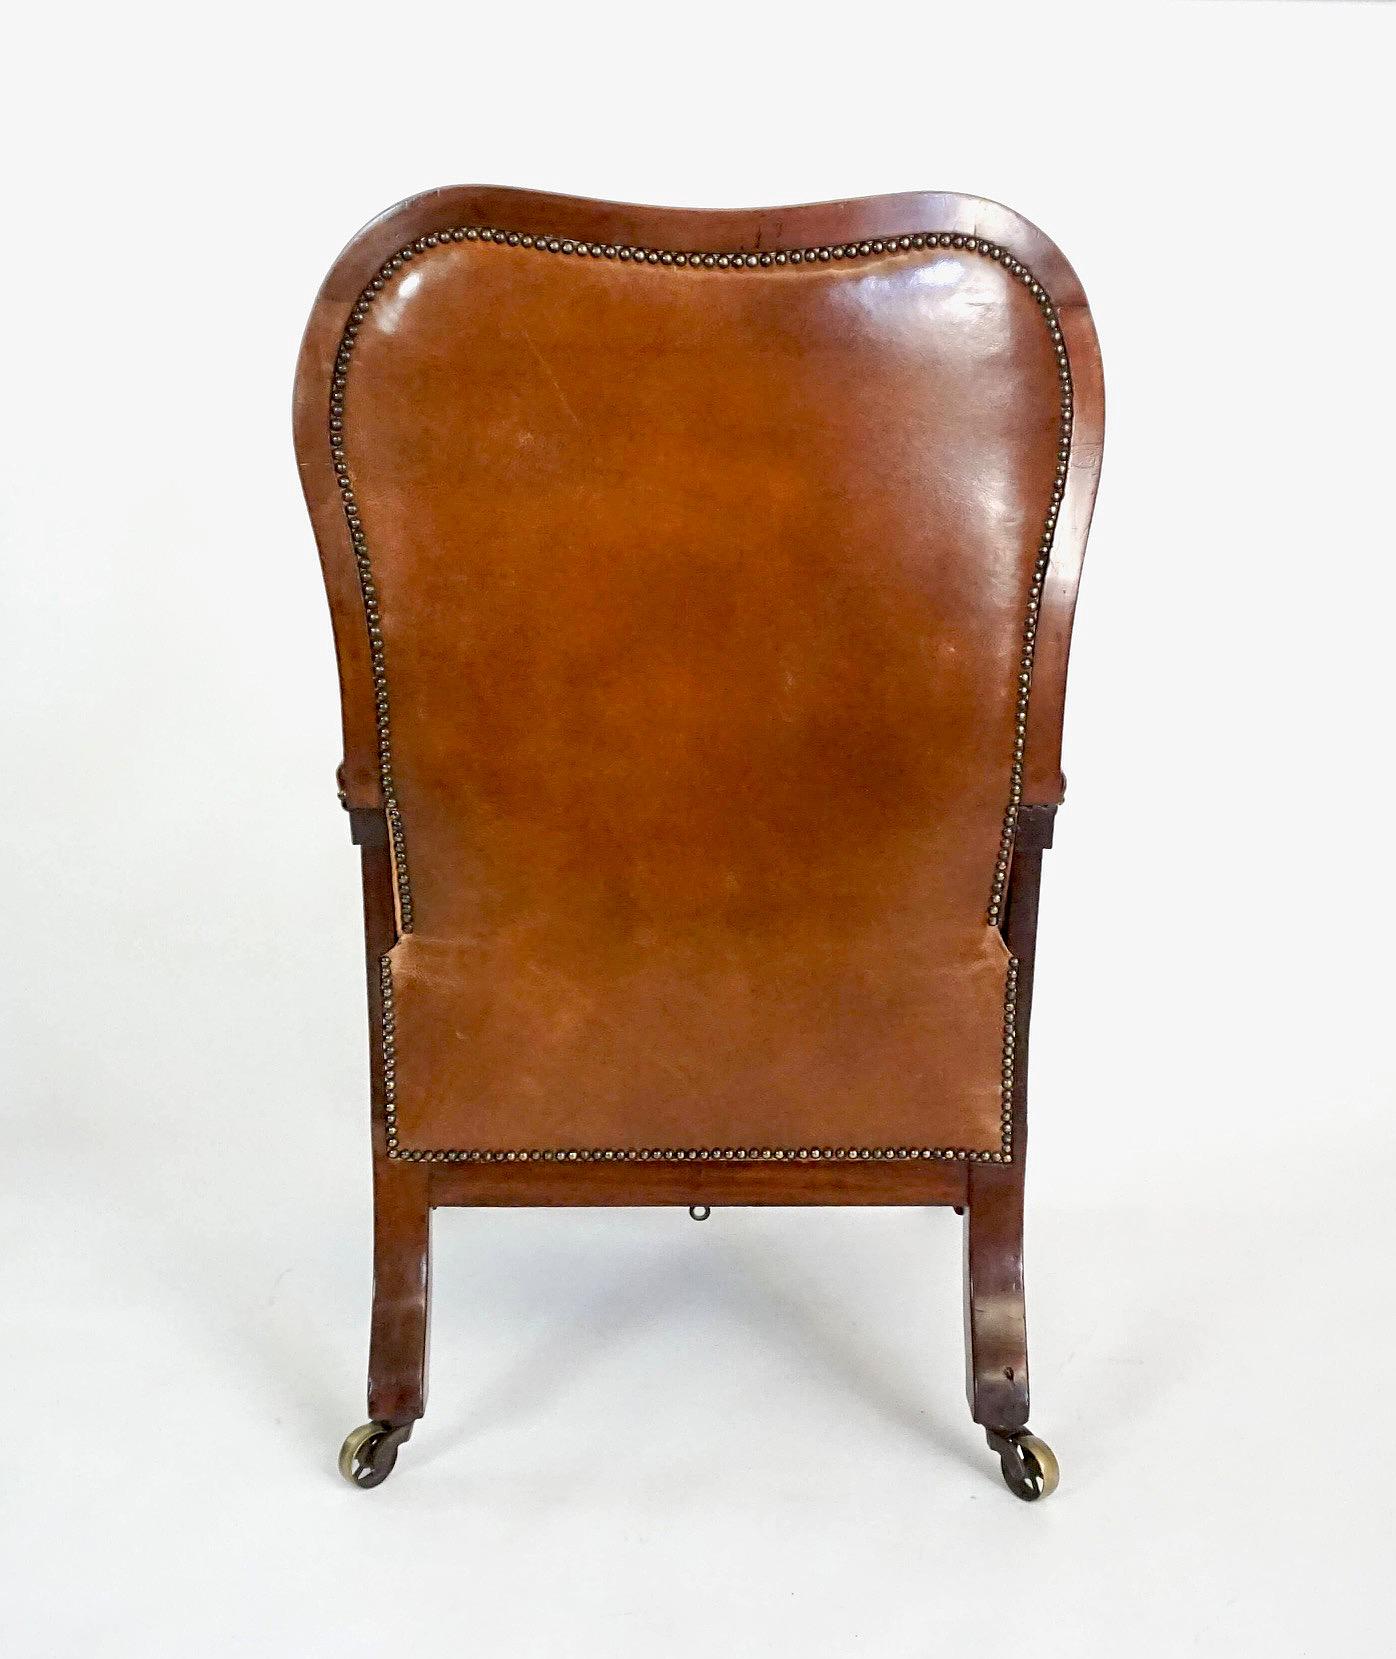 Regency Leather Upholstered Mahogany Reclining Armchair, circa 1830 In Good Condition For Sale In Kinderhook, NY